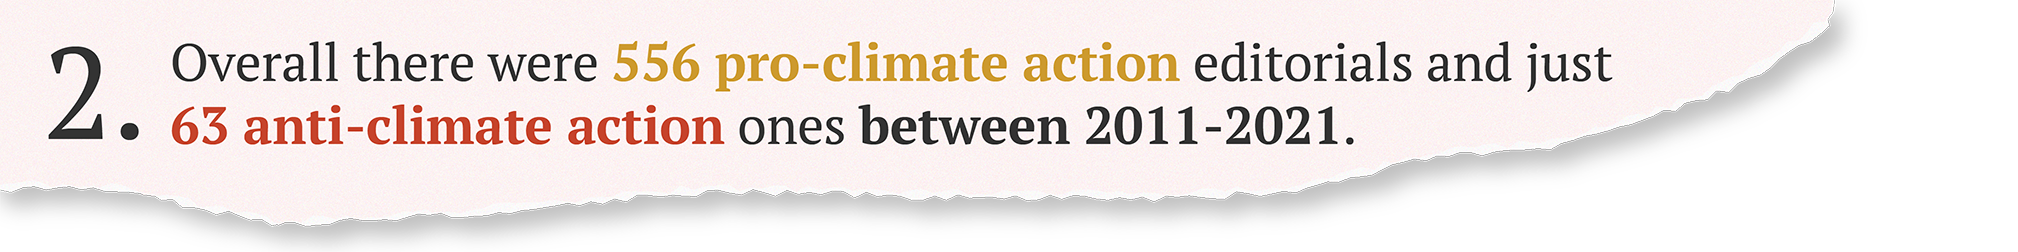 Overall there were 556 pro-climate action editorials and just 63 anti-climate action ones between 2011-2021.